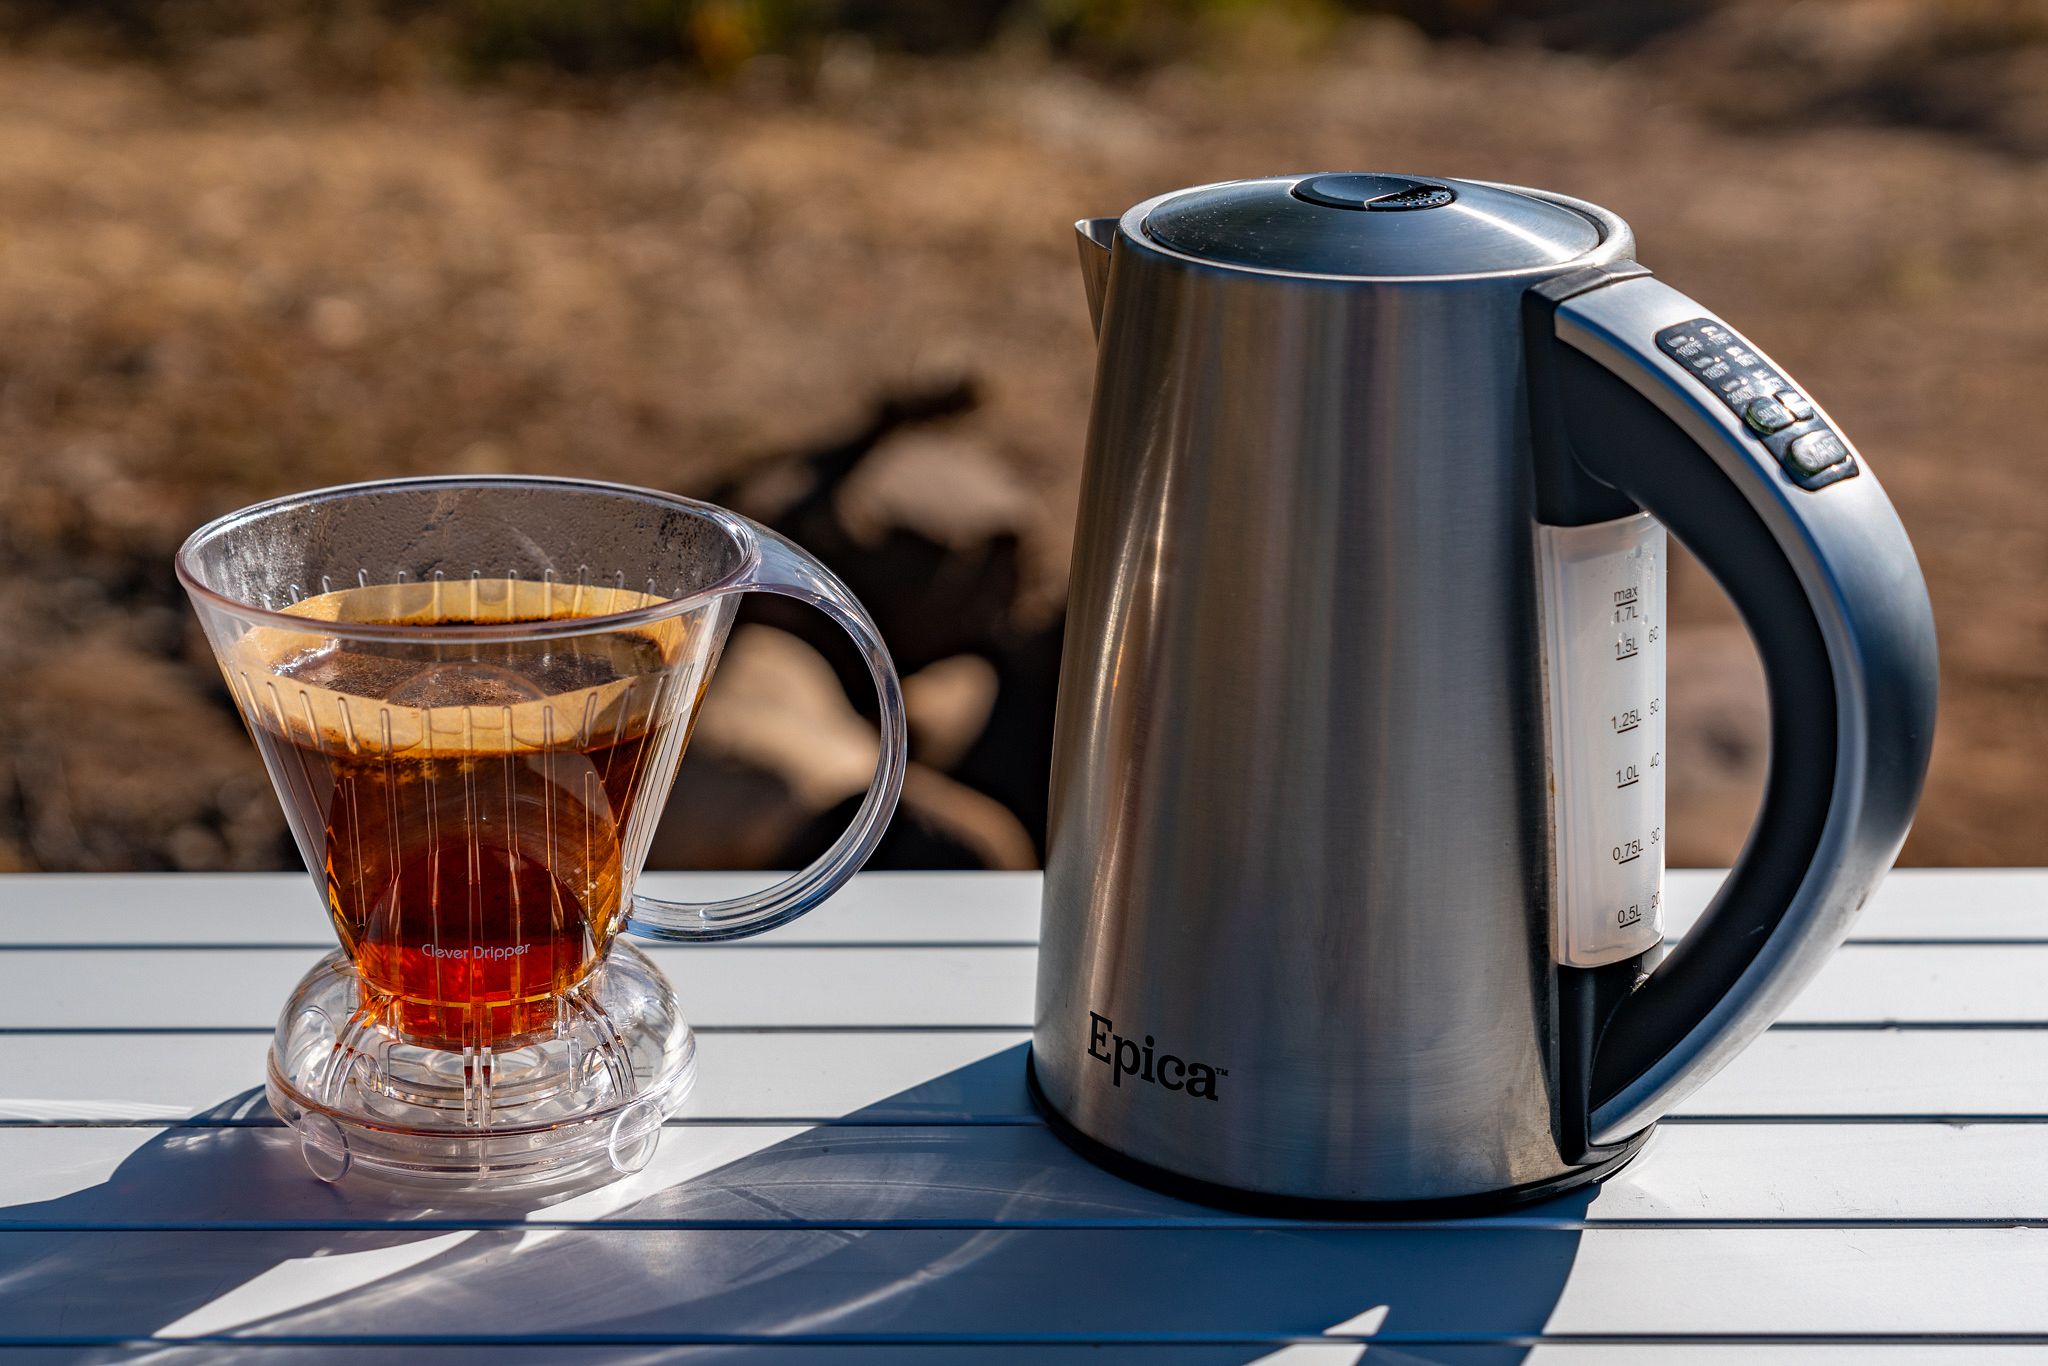 https://www.adventurousway.com/images/i/tis3r5ae6328/2048w/gear-reviews/clever-dripper-coffee-maker/epica-electric-kettle.jpeg